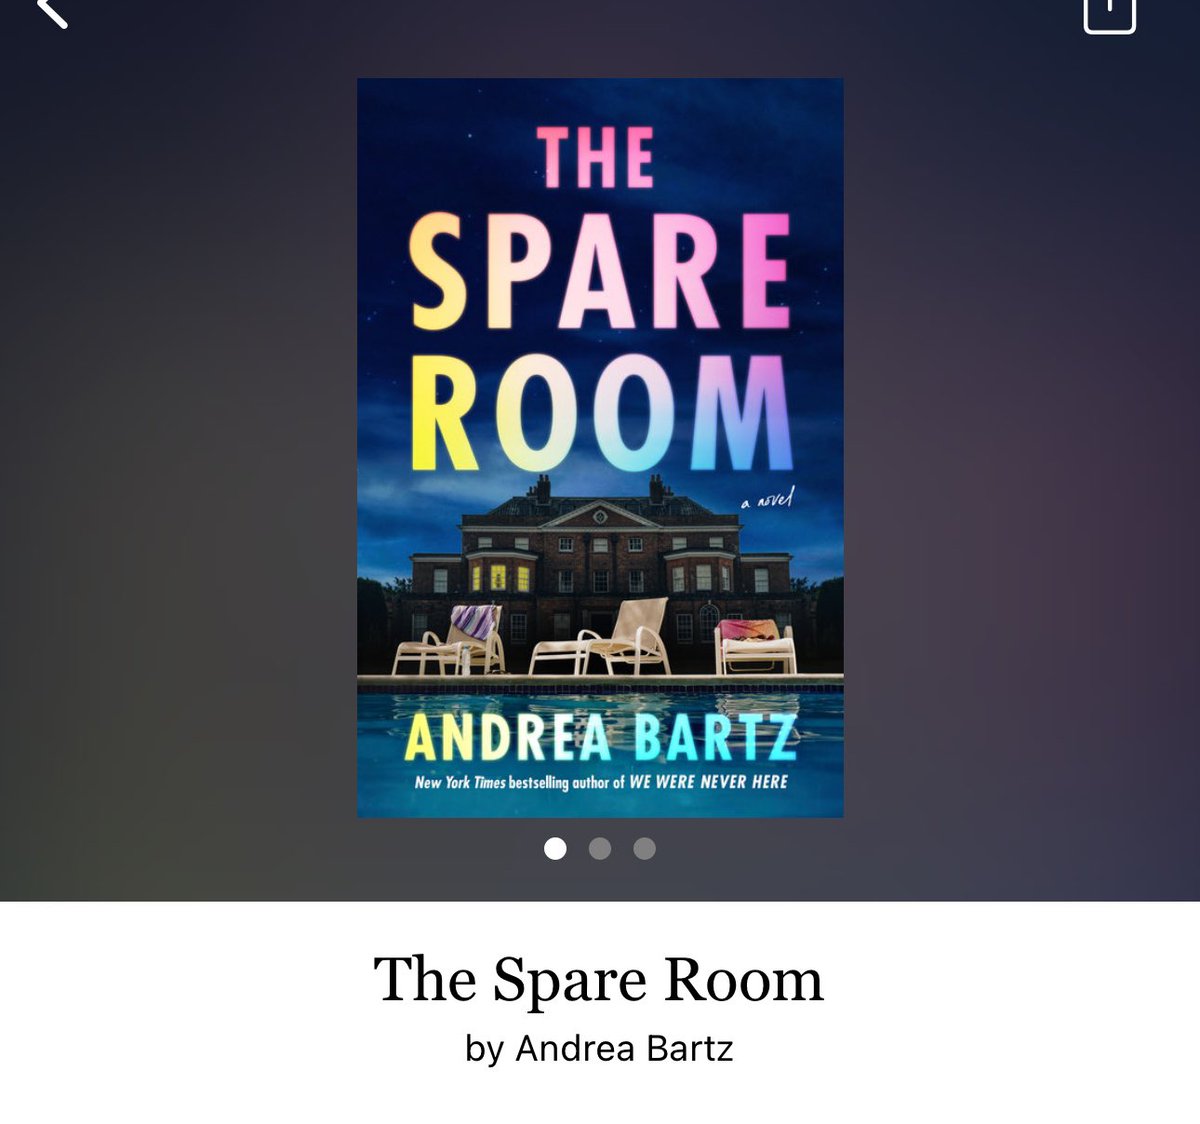 The Spare Room by Andrea Bartz 

#TheSpareRoom by #AndreaBartz #5625 #64chapters #336pages #1168of400 #11houraudiobook #Audiobook #23for6 #November2023 #clearingoffreadingshelves #whatsnext #readitquick